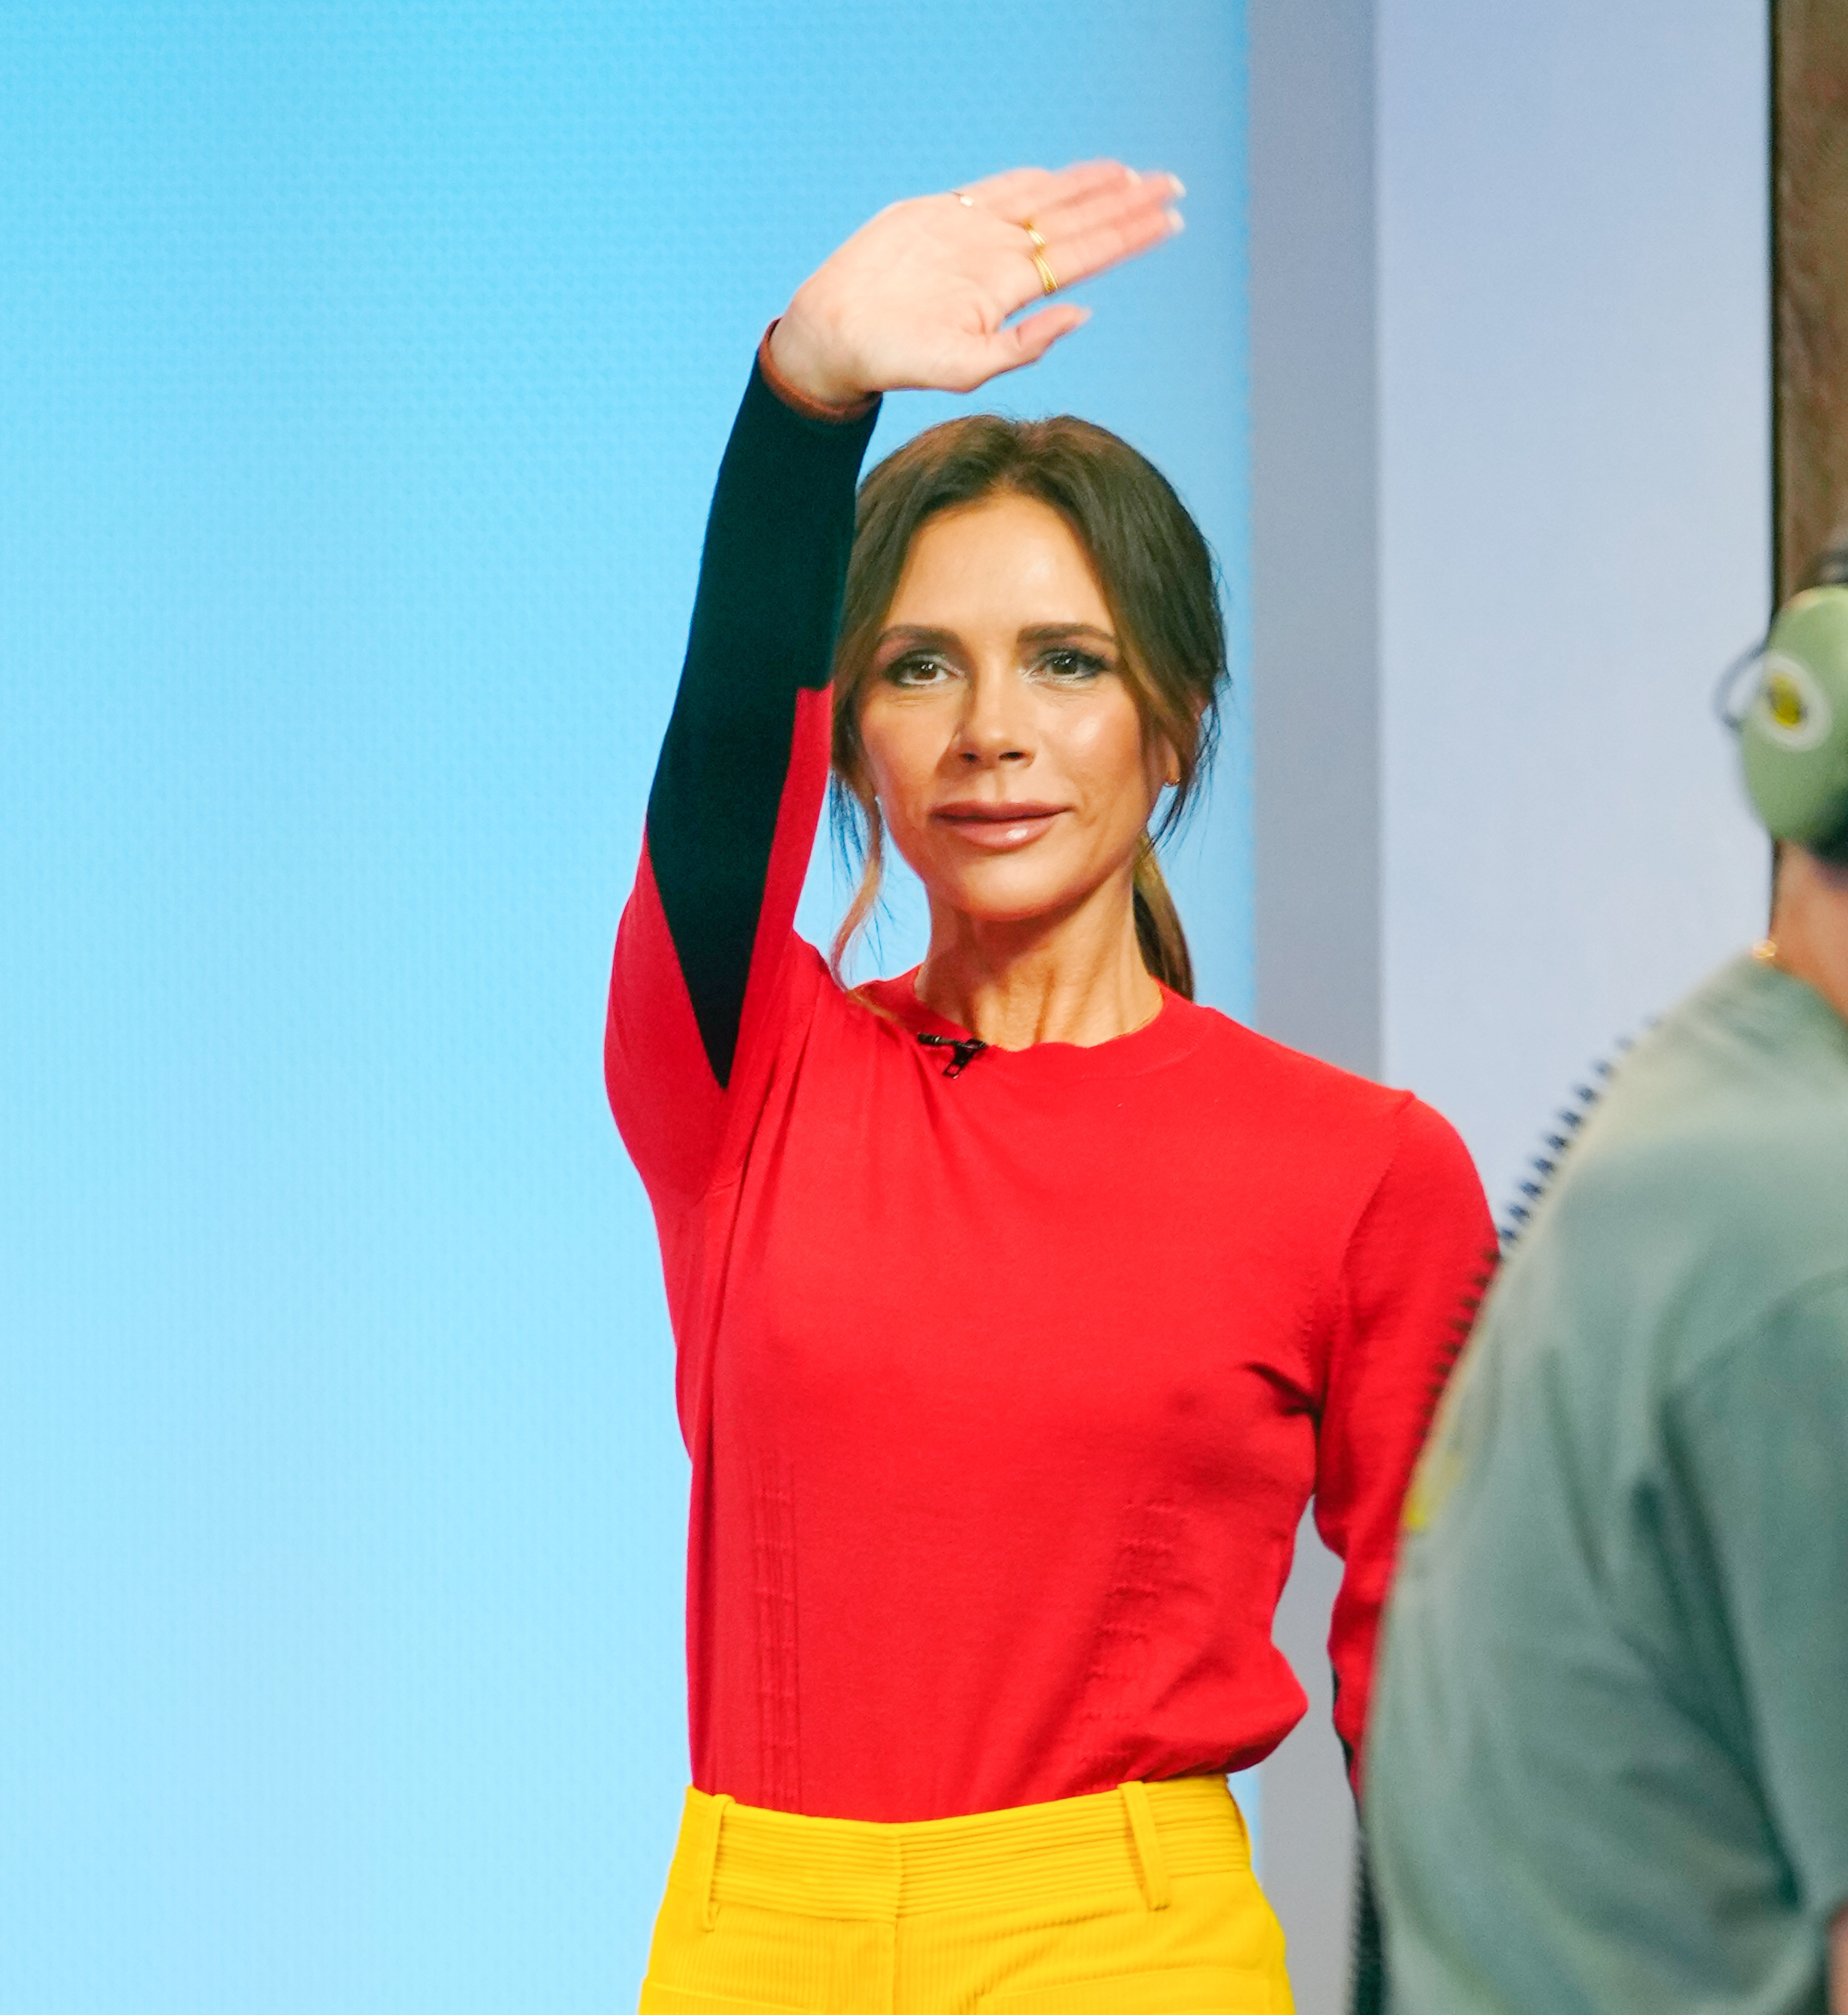 Victoria Beckham on the "Good Morning America" show in New York on October 12, 2021 | Source: Getty Images